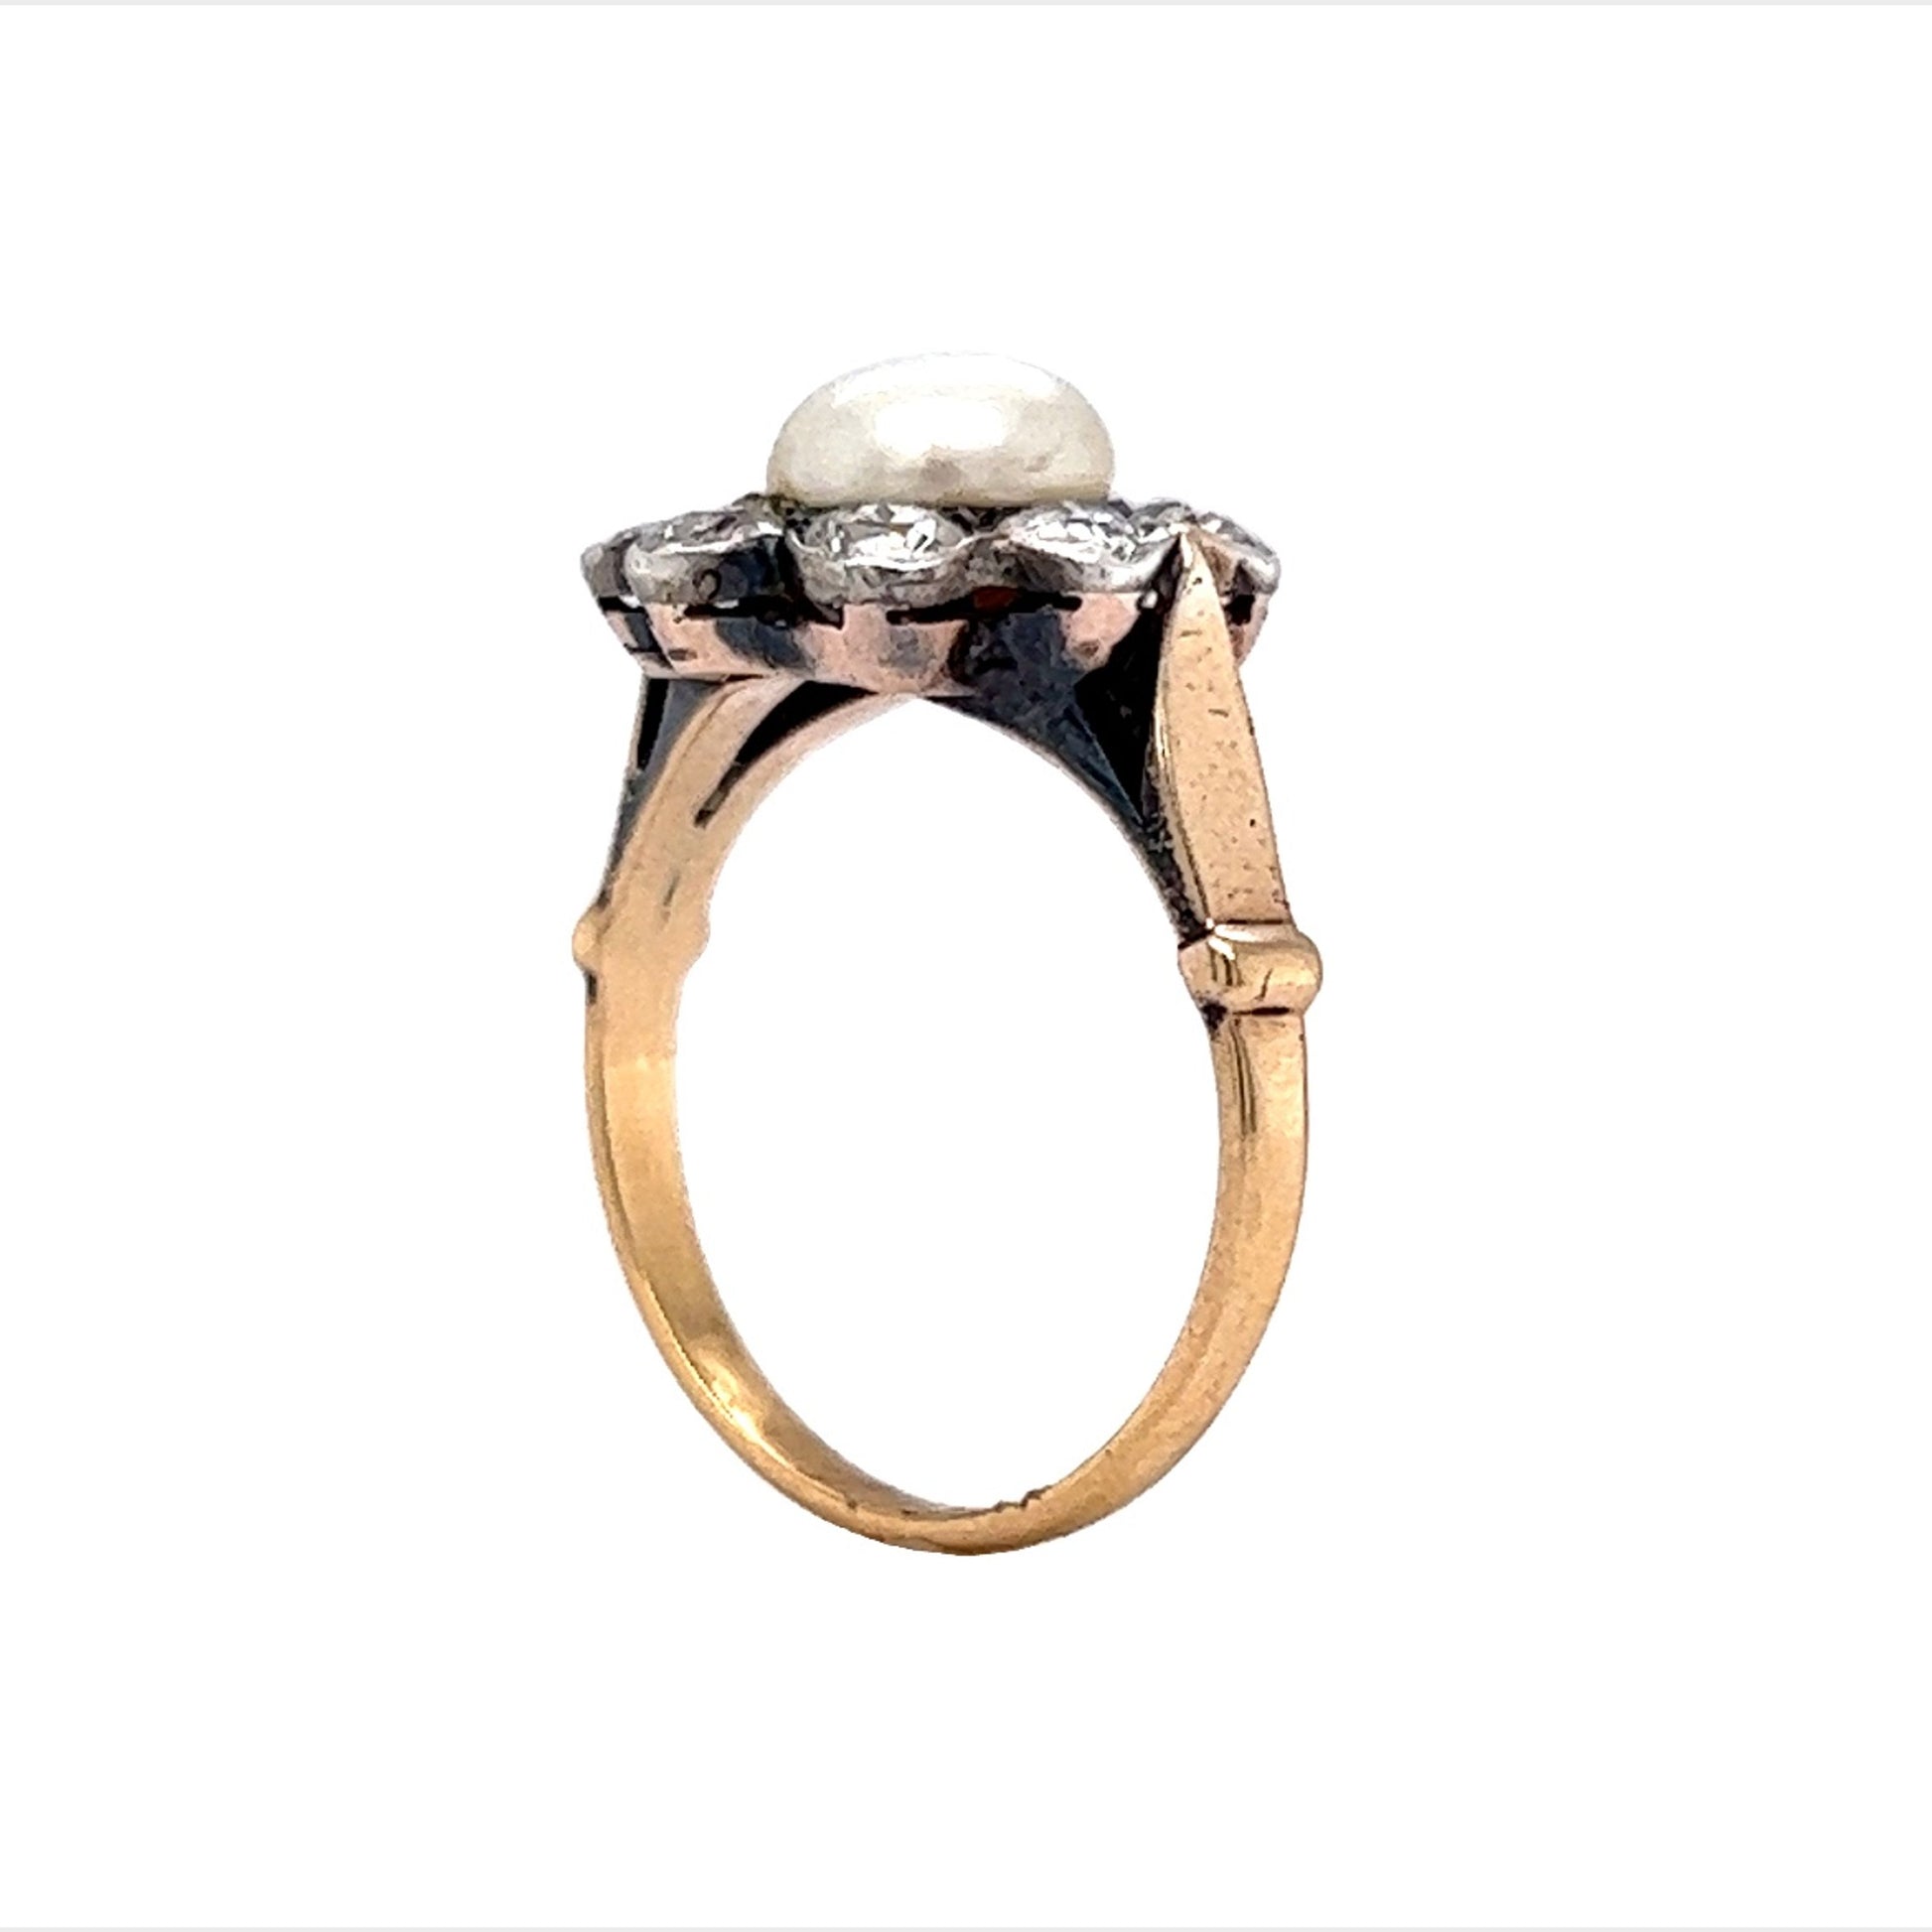 Victorian Pearl & Diamond Ring in Yellow Gold & Sterling Silver